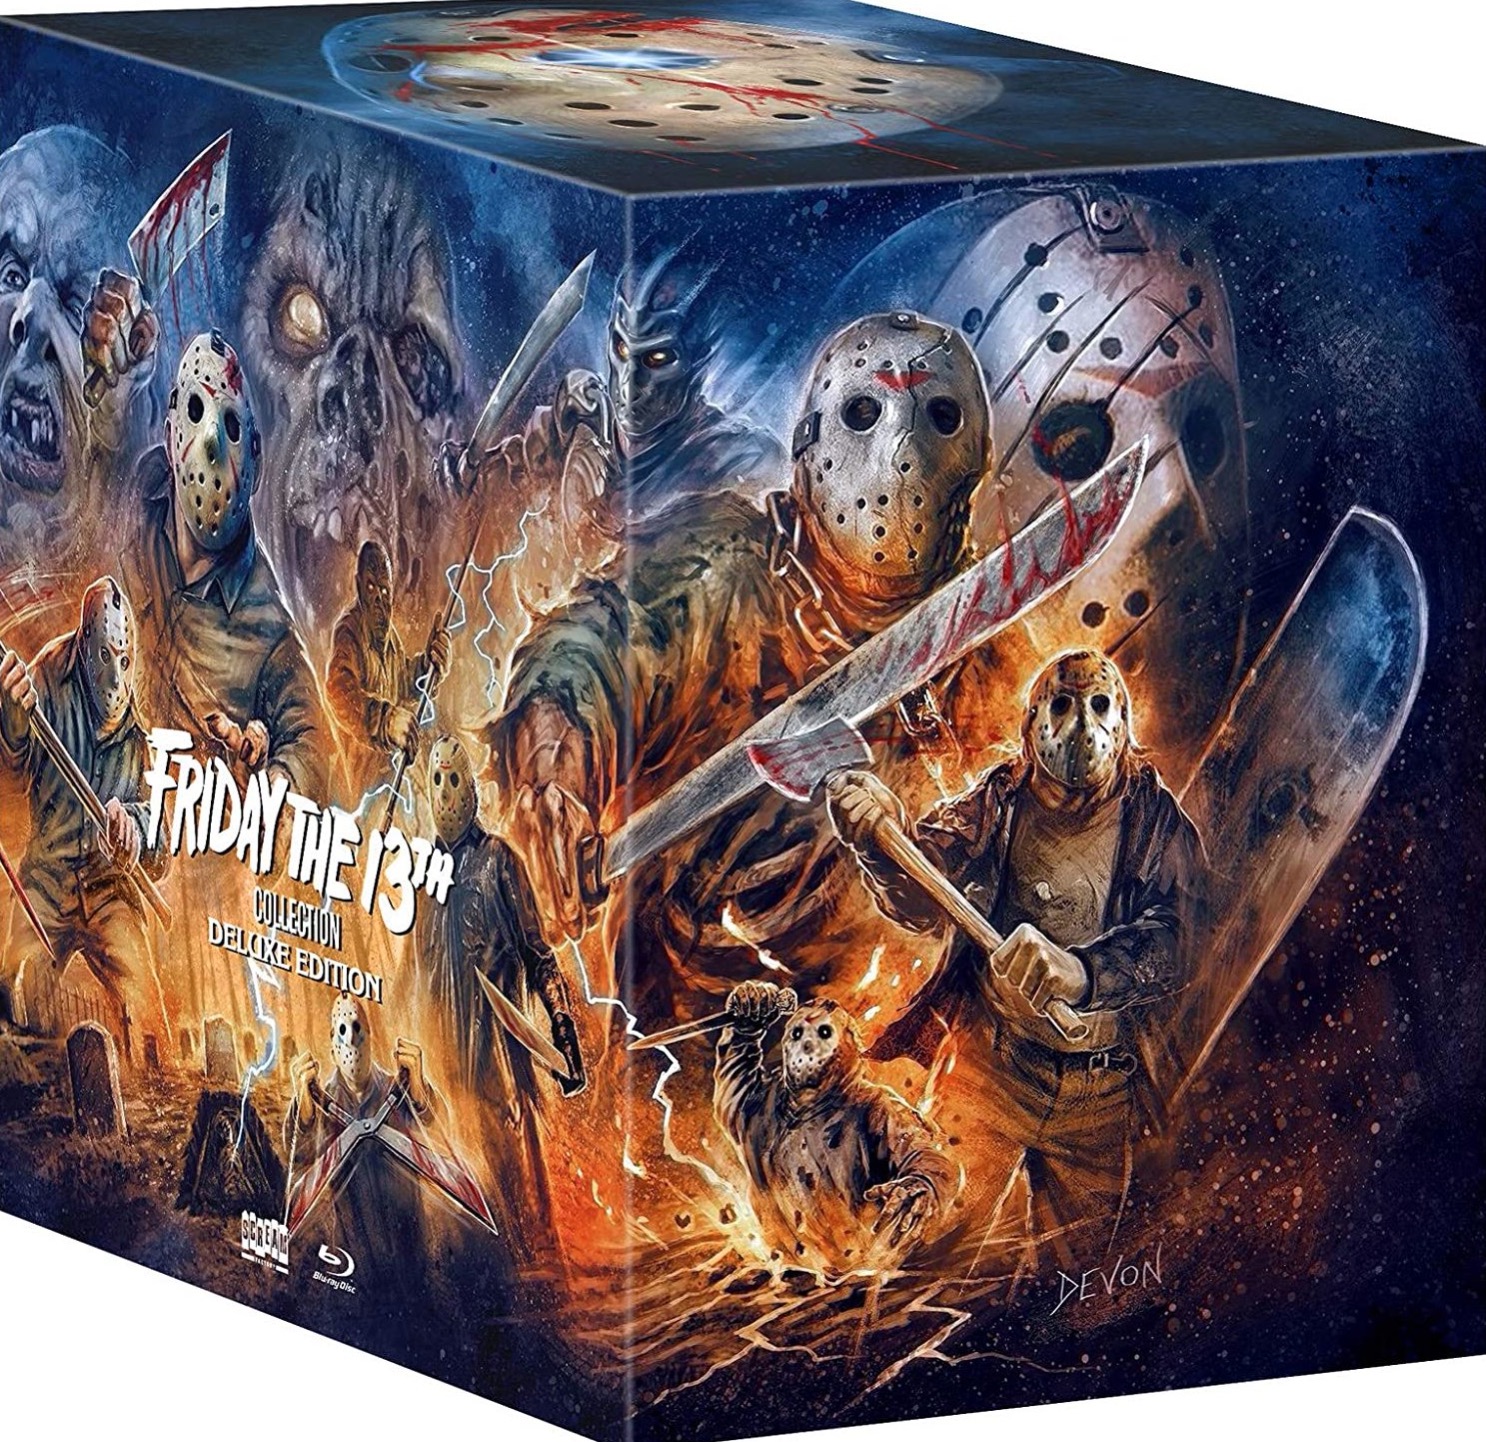 The box art in full. (Image: Devon Whitehead for Shout Factory)